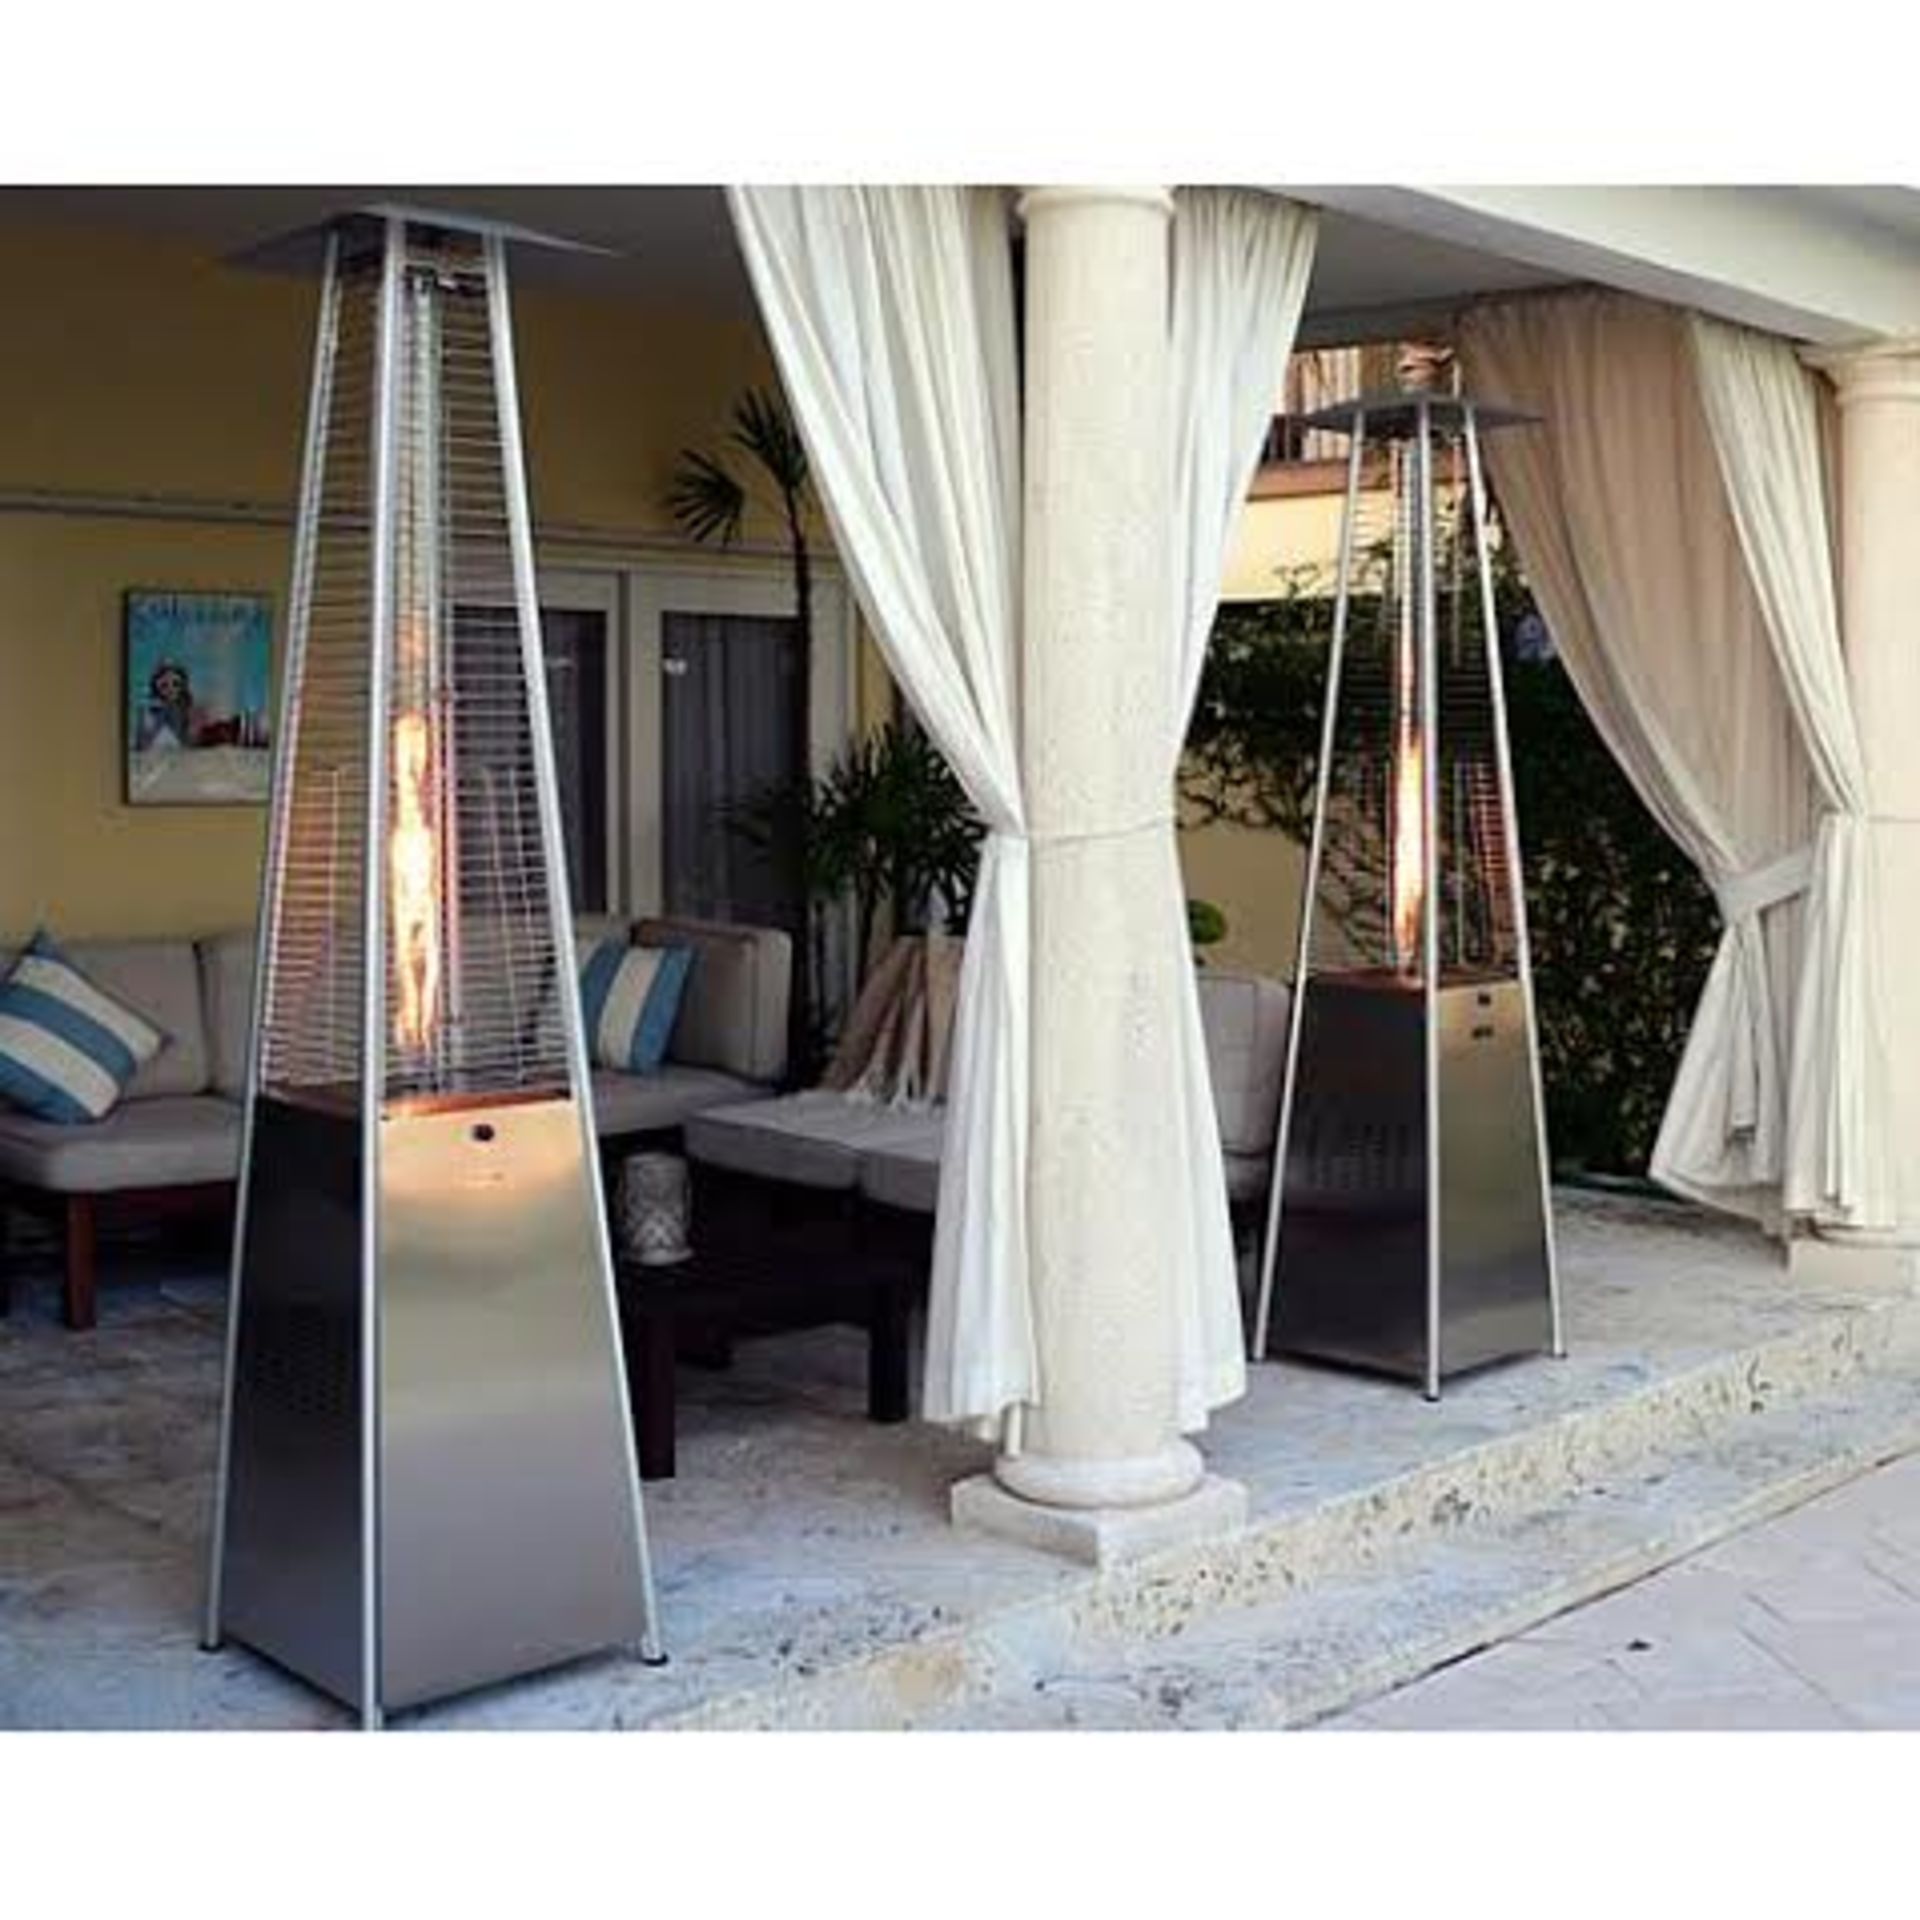 The BRAND NEW Garden Square Pyramid Flame Patio Heater features exceptional build quality *1 Unit